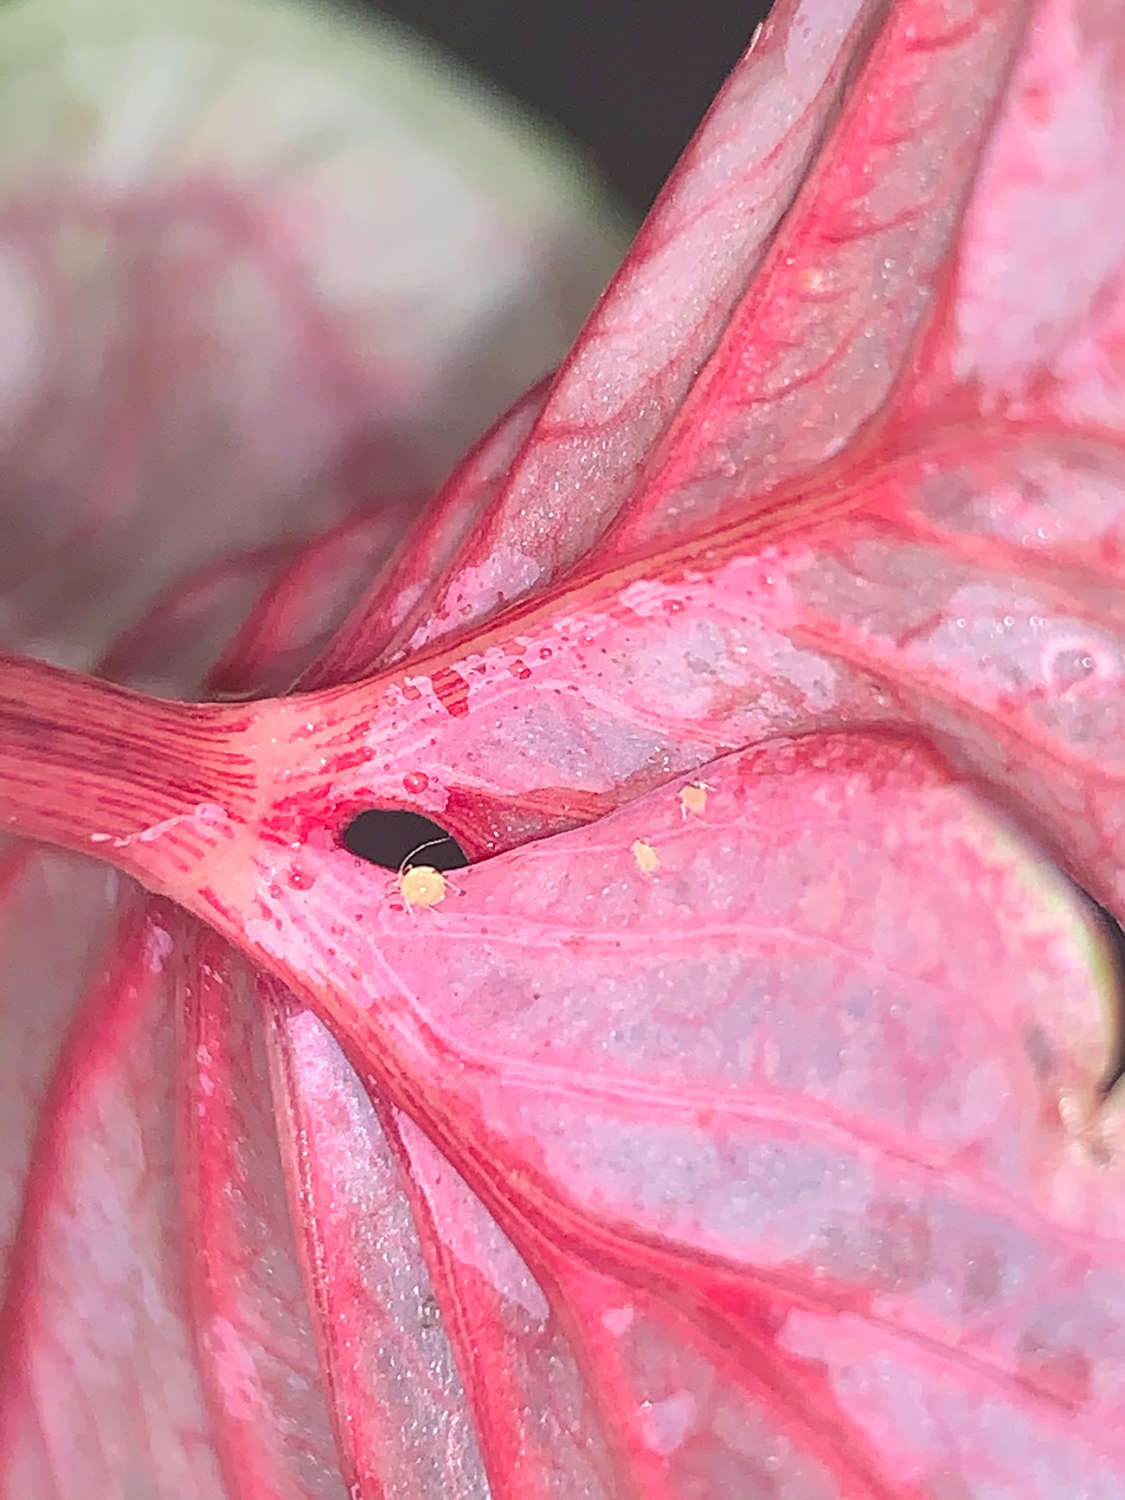 Identifying common plant pests on indoor plants Aphids